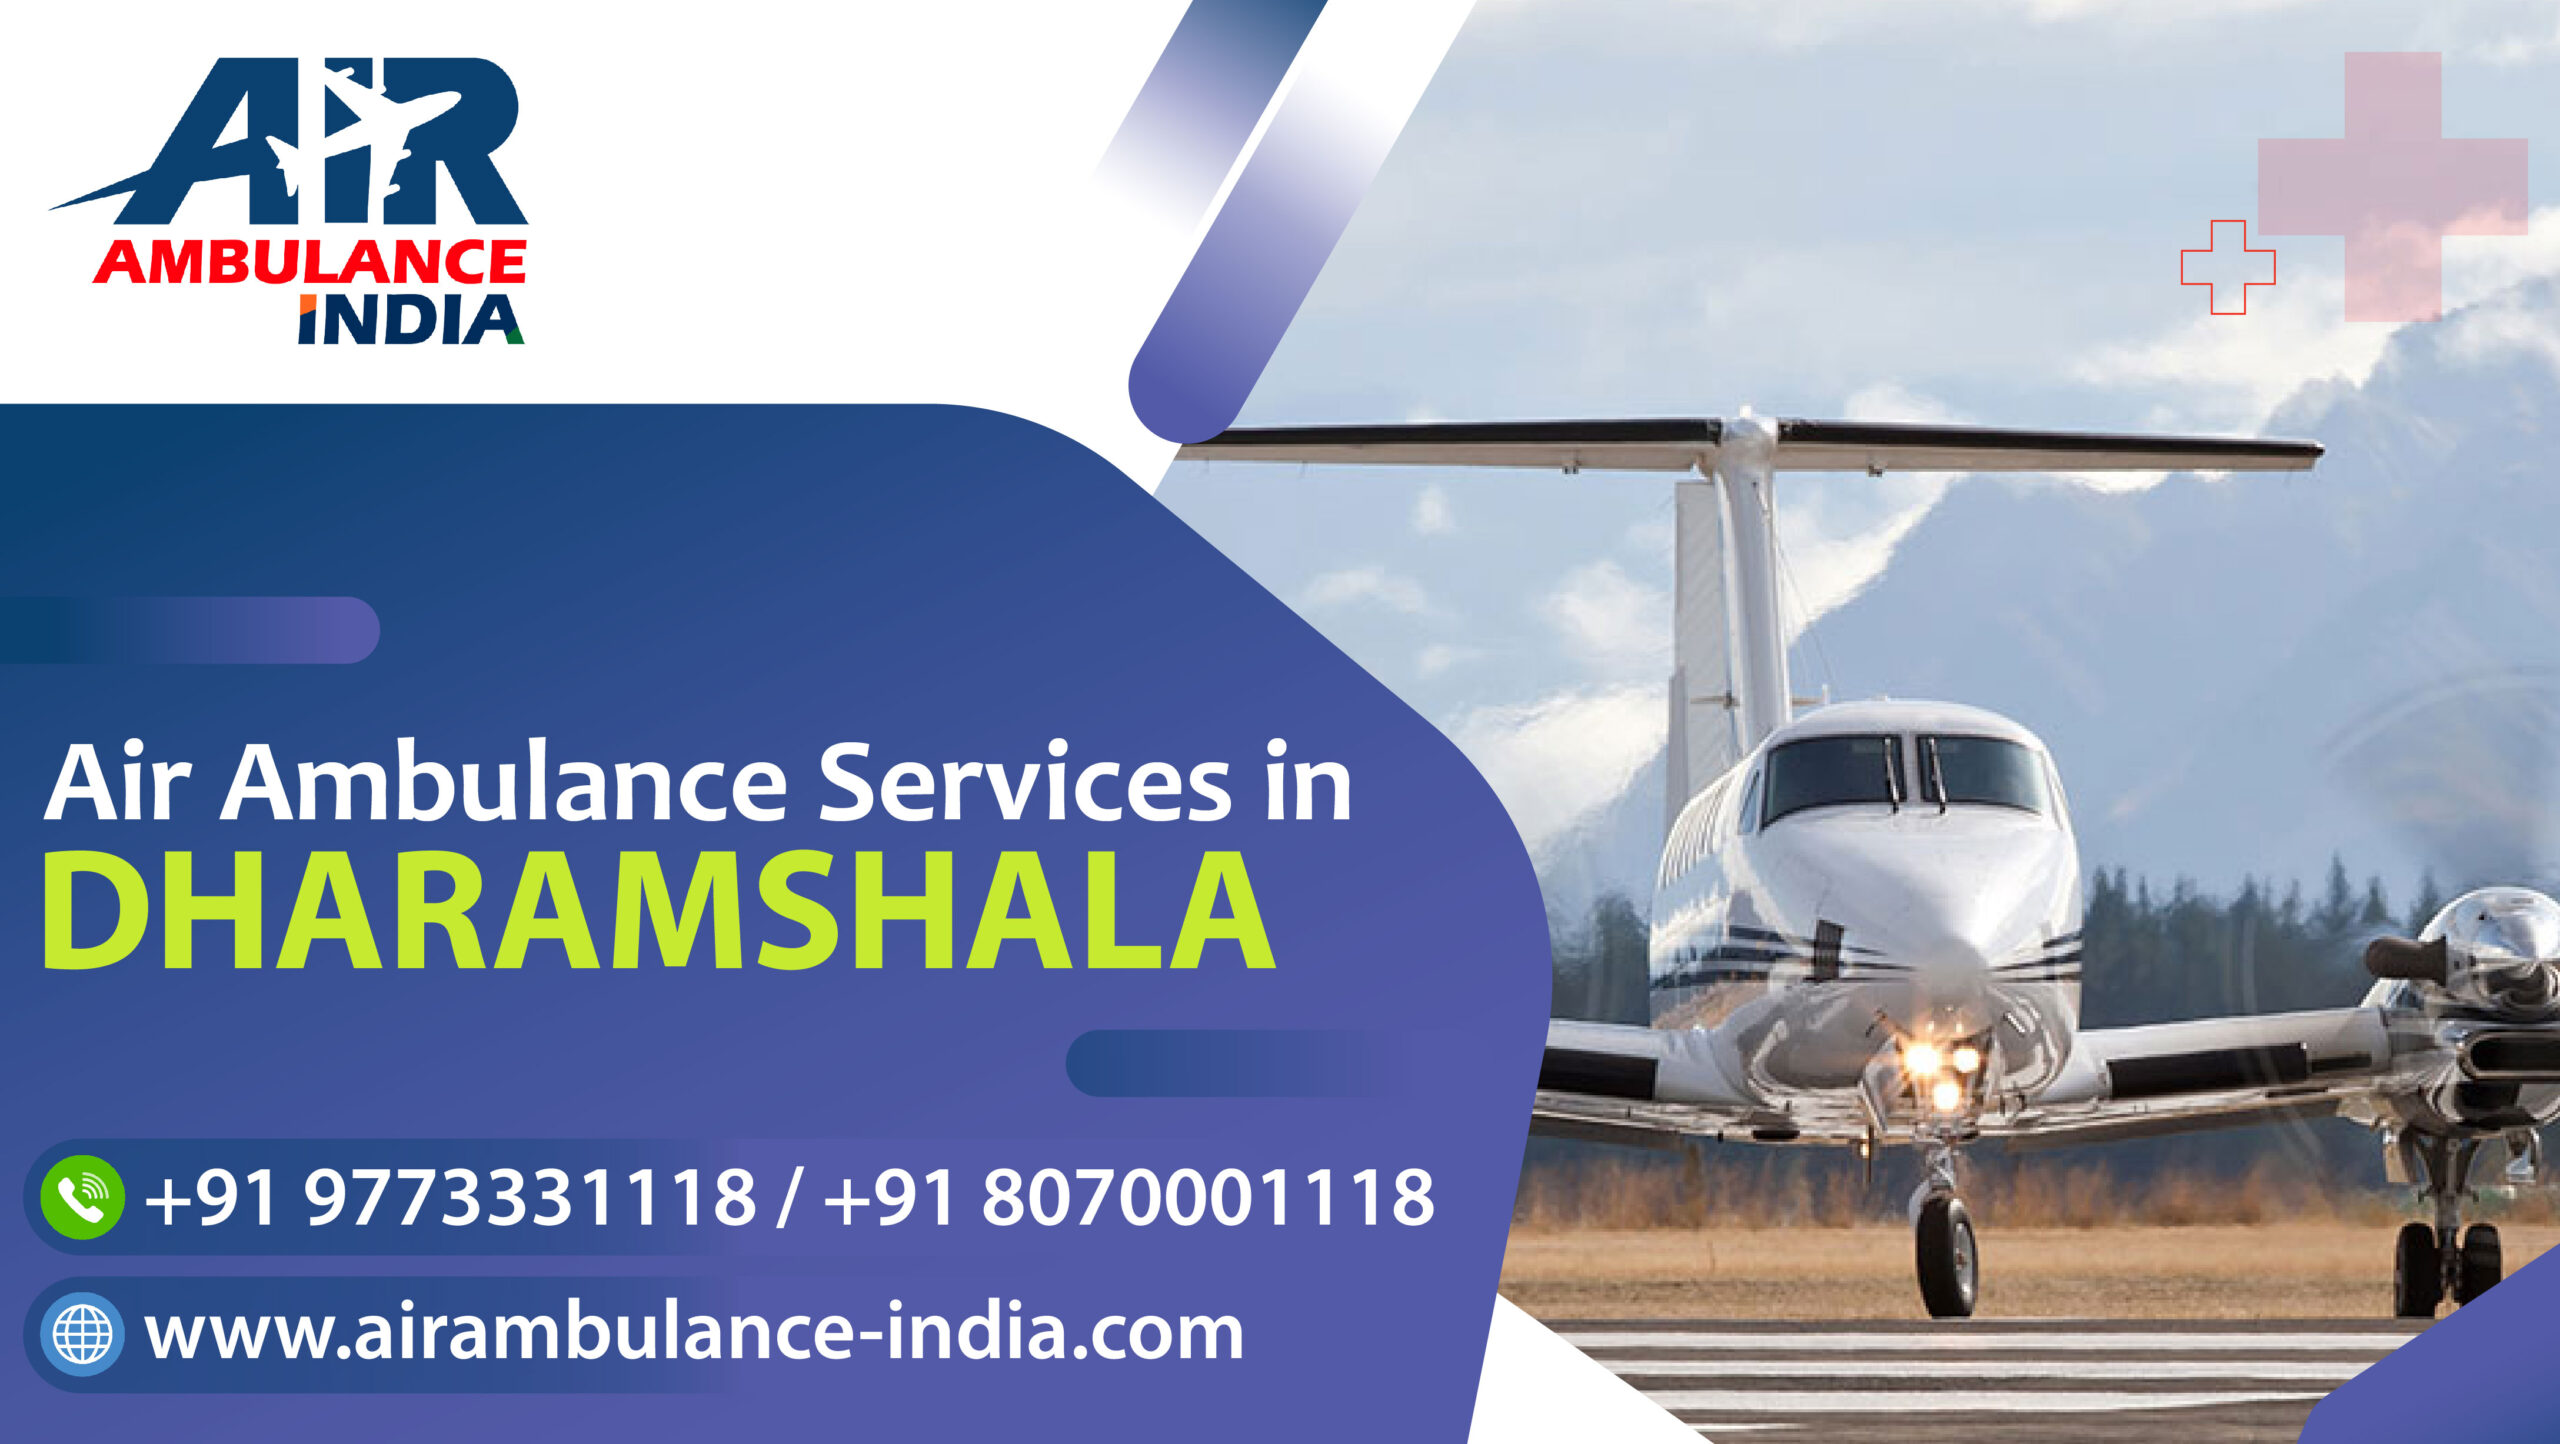 Air Ambulance Services in Dharamshala